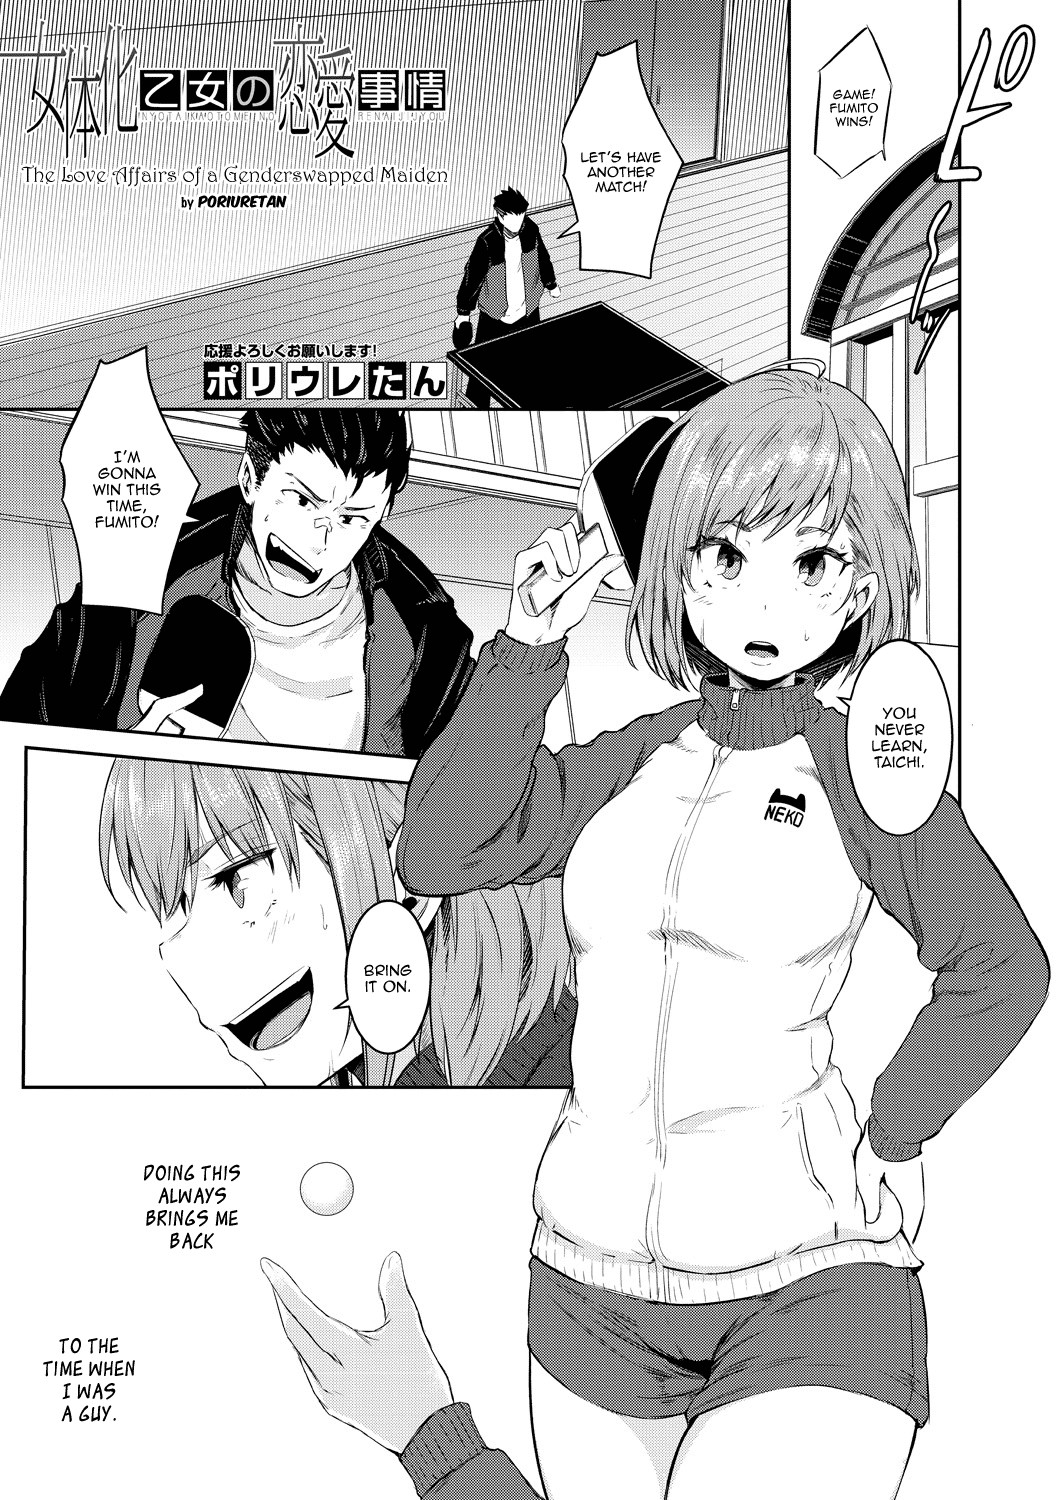 Hentai Manga Comic-The Love Affairs of a Genderswapped Maiden-Read-1